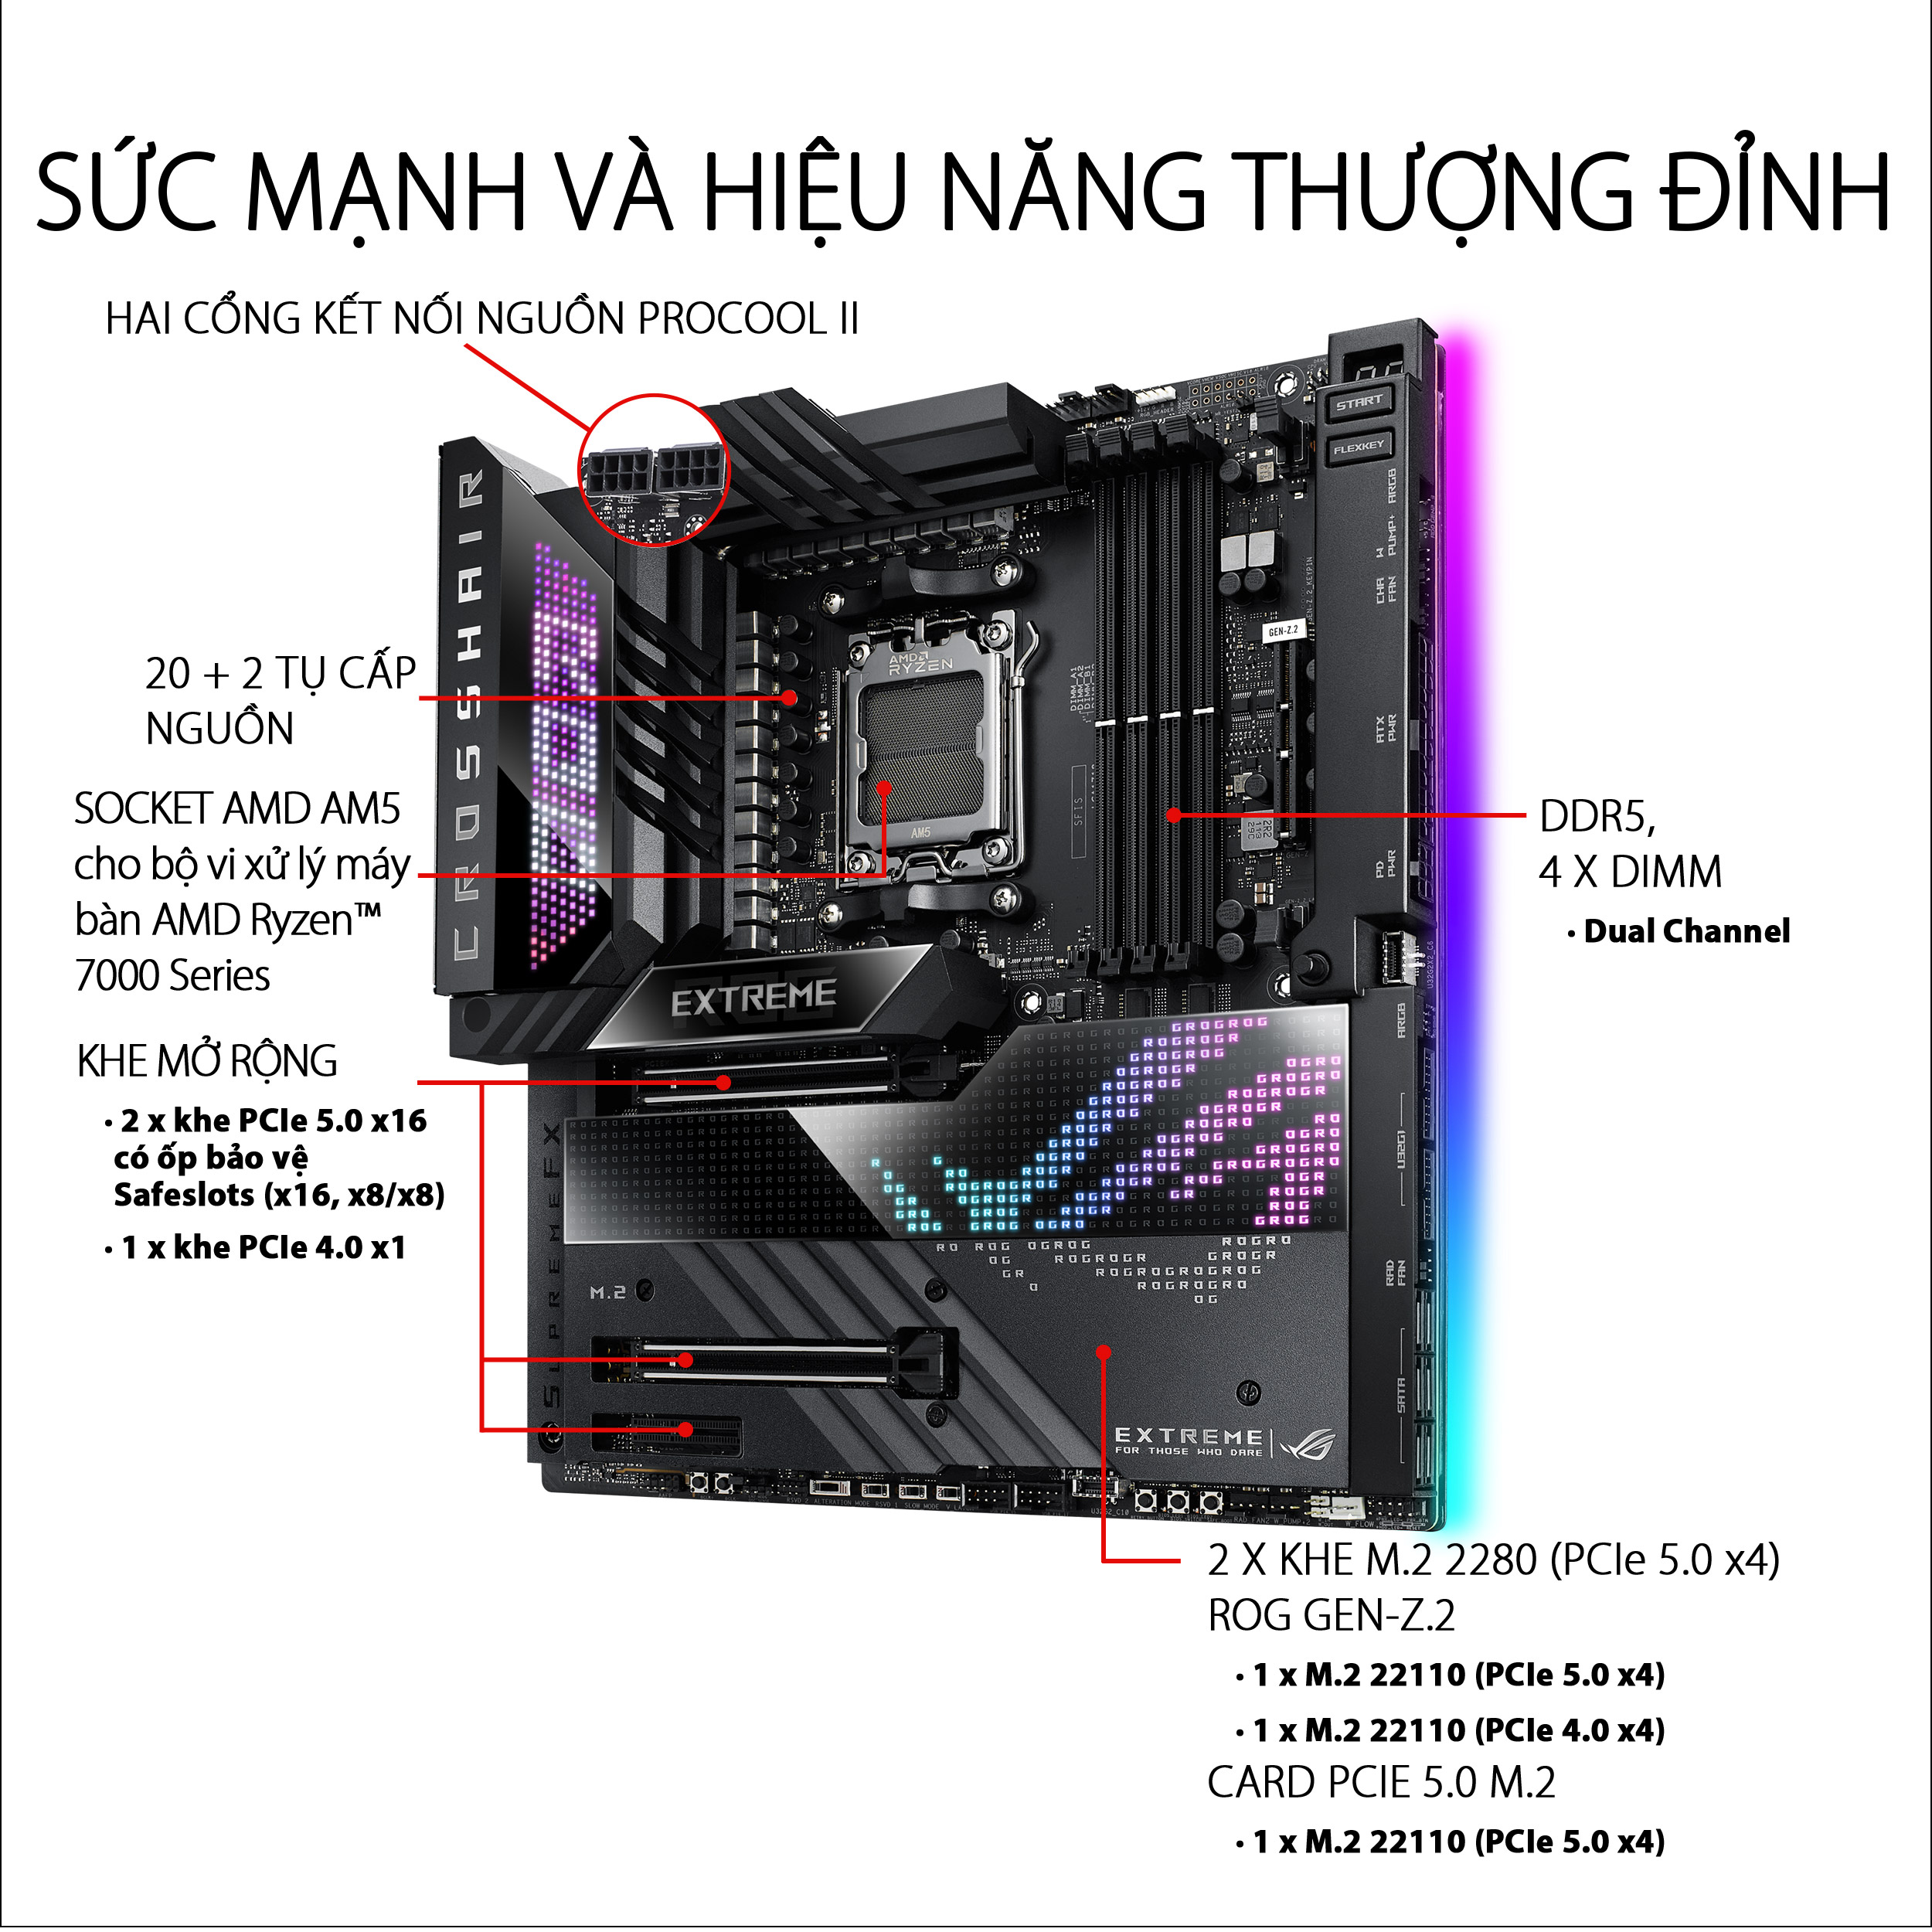 Mainboard ASUS ROG CROSSHAIR X670E EXTREME